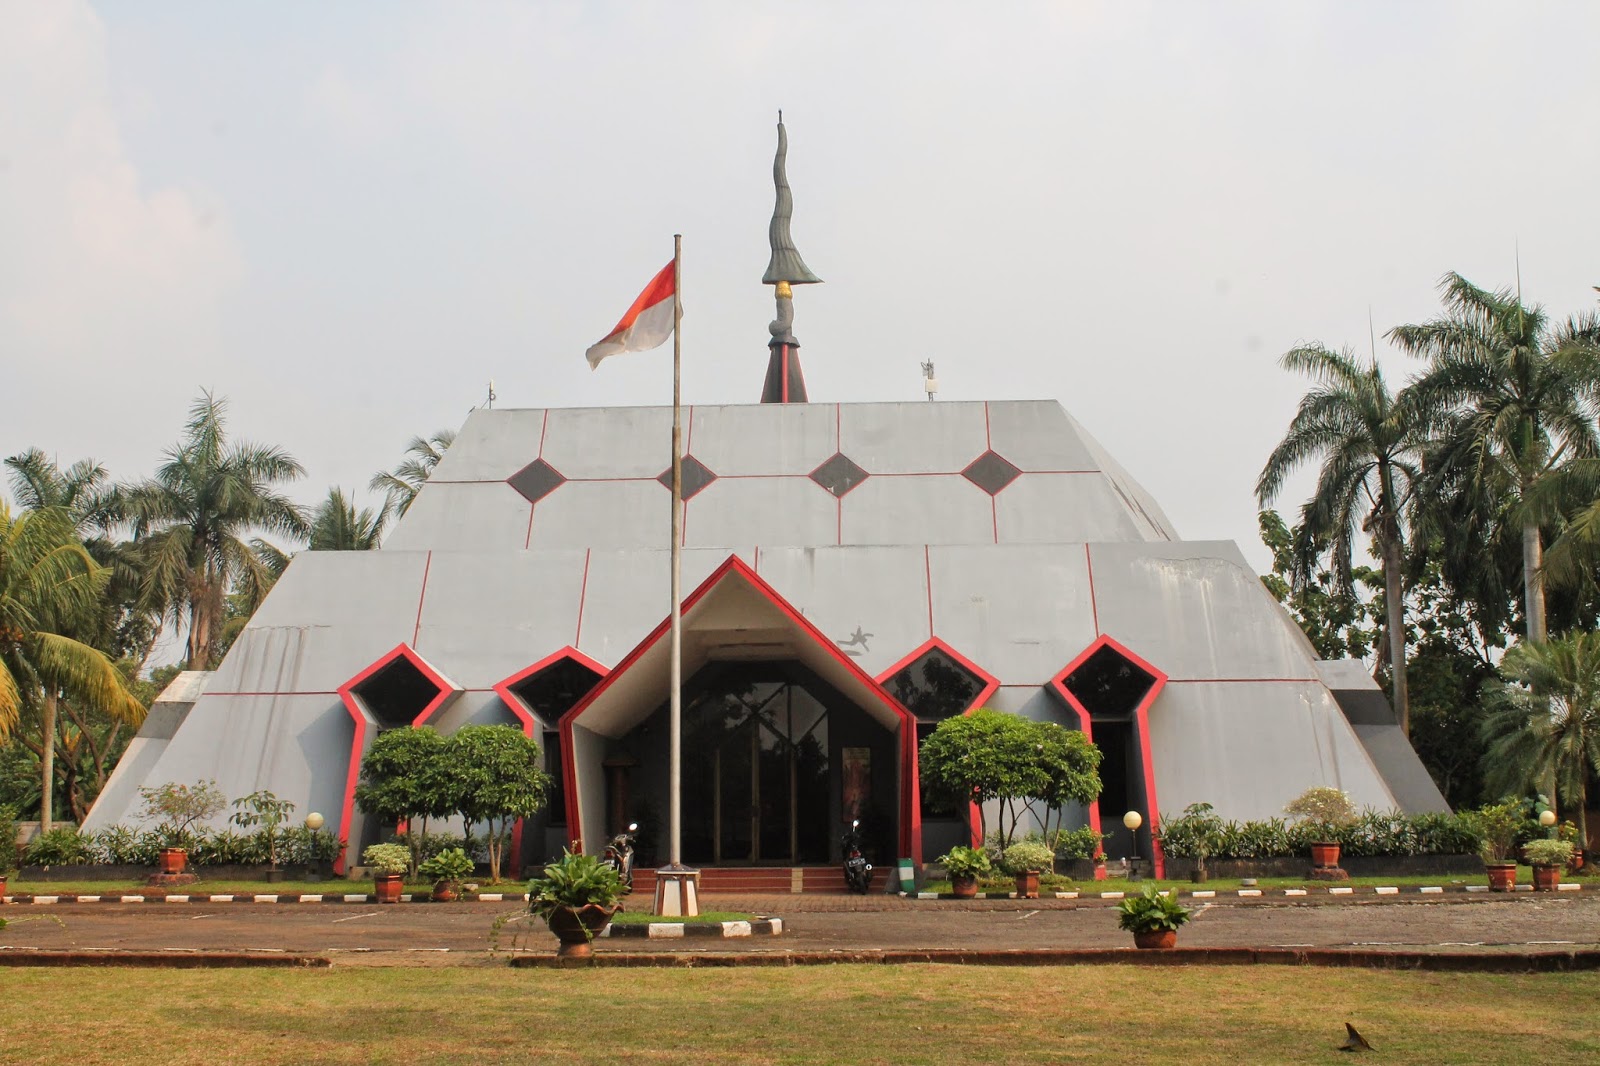  The image shows the Museum Pusaka Indonesia, a museum in Jakarta, Indonesia, which houses a collection of Indonesian cultural heritage and historical artifacts.